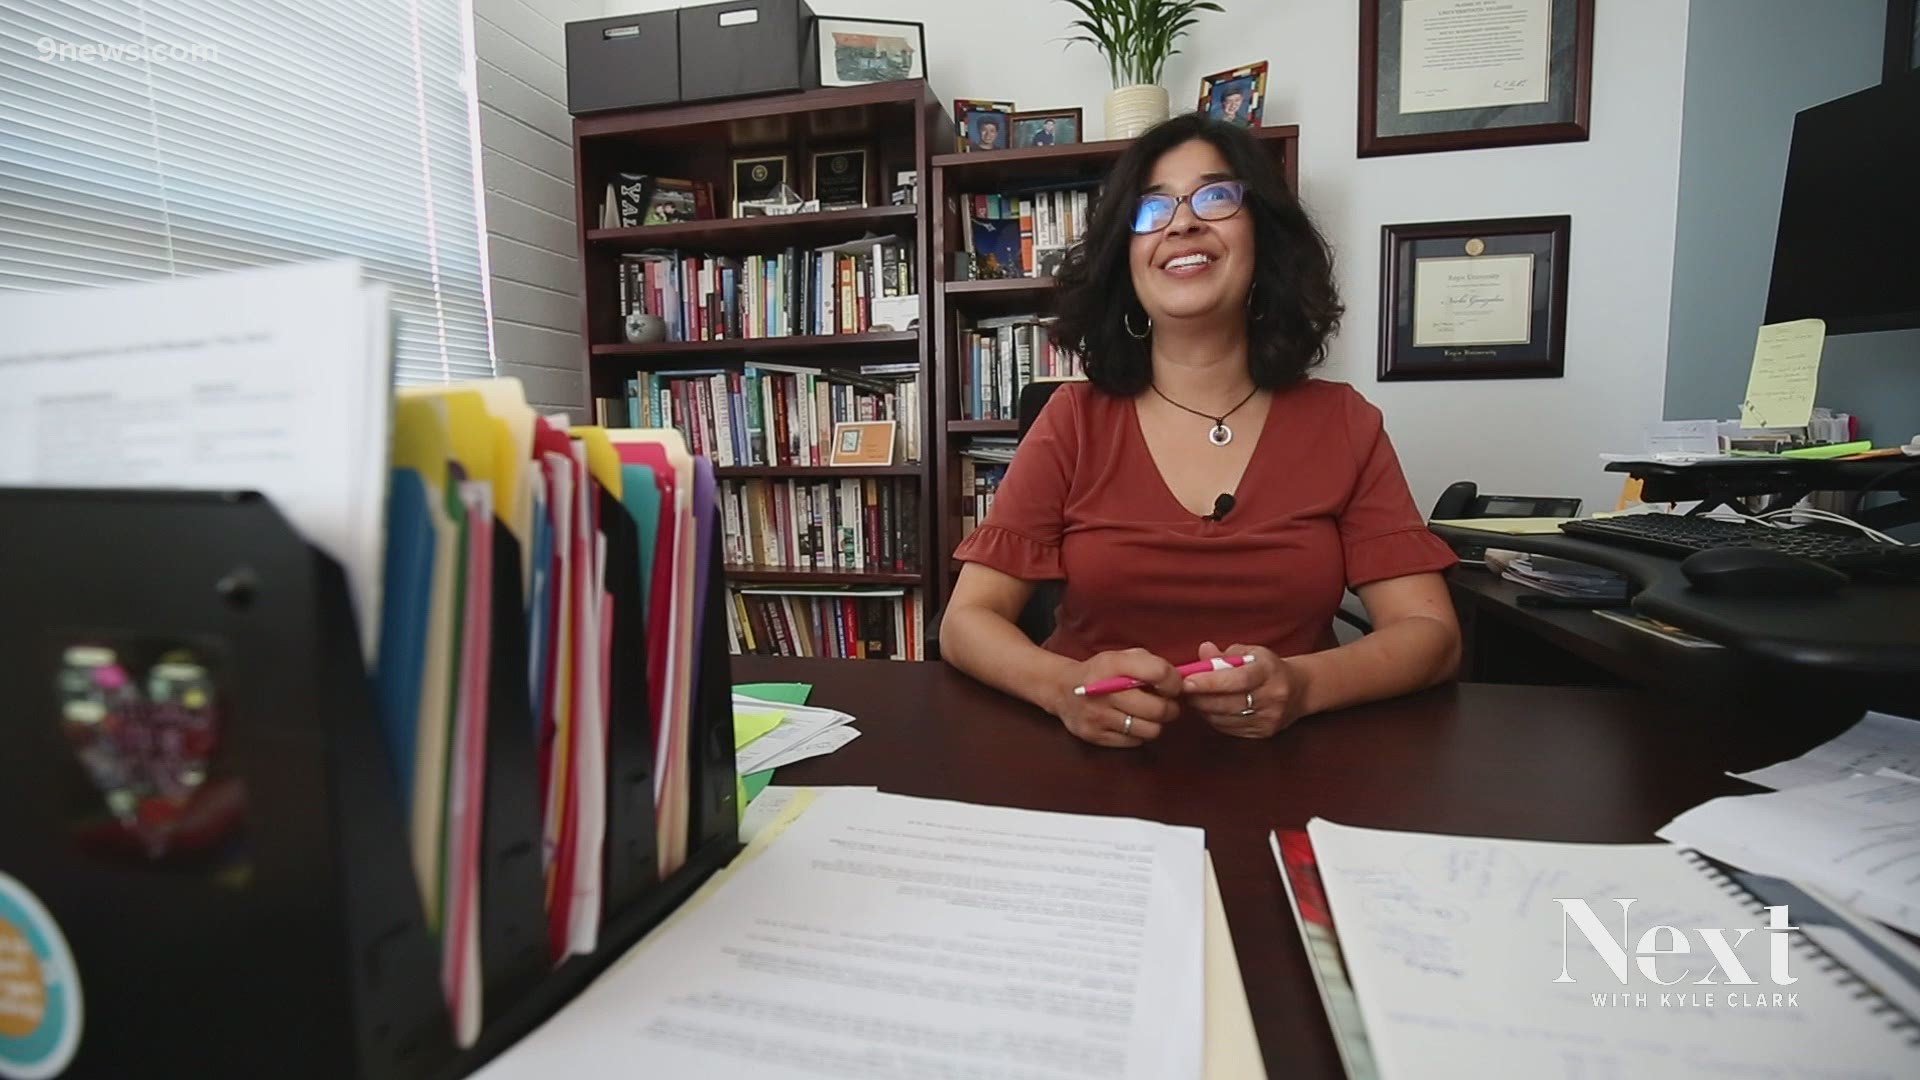 Dr. Nicki Gonzales is a professor at Regis University. In her new role, she hopes to shine a light on lesser-known stories from Colorado's history.